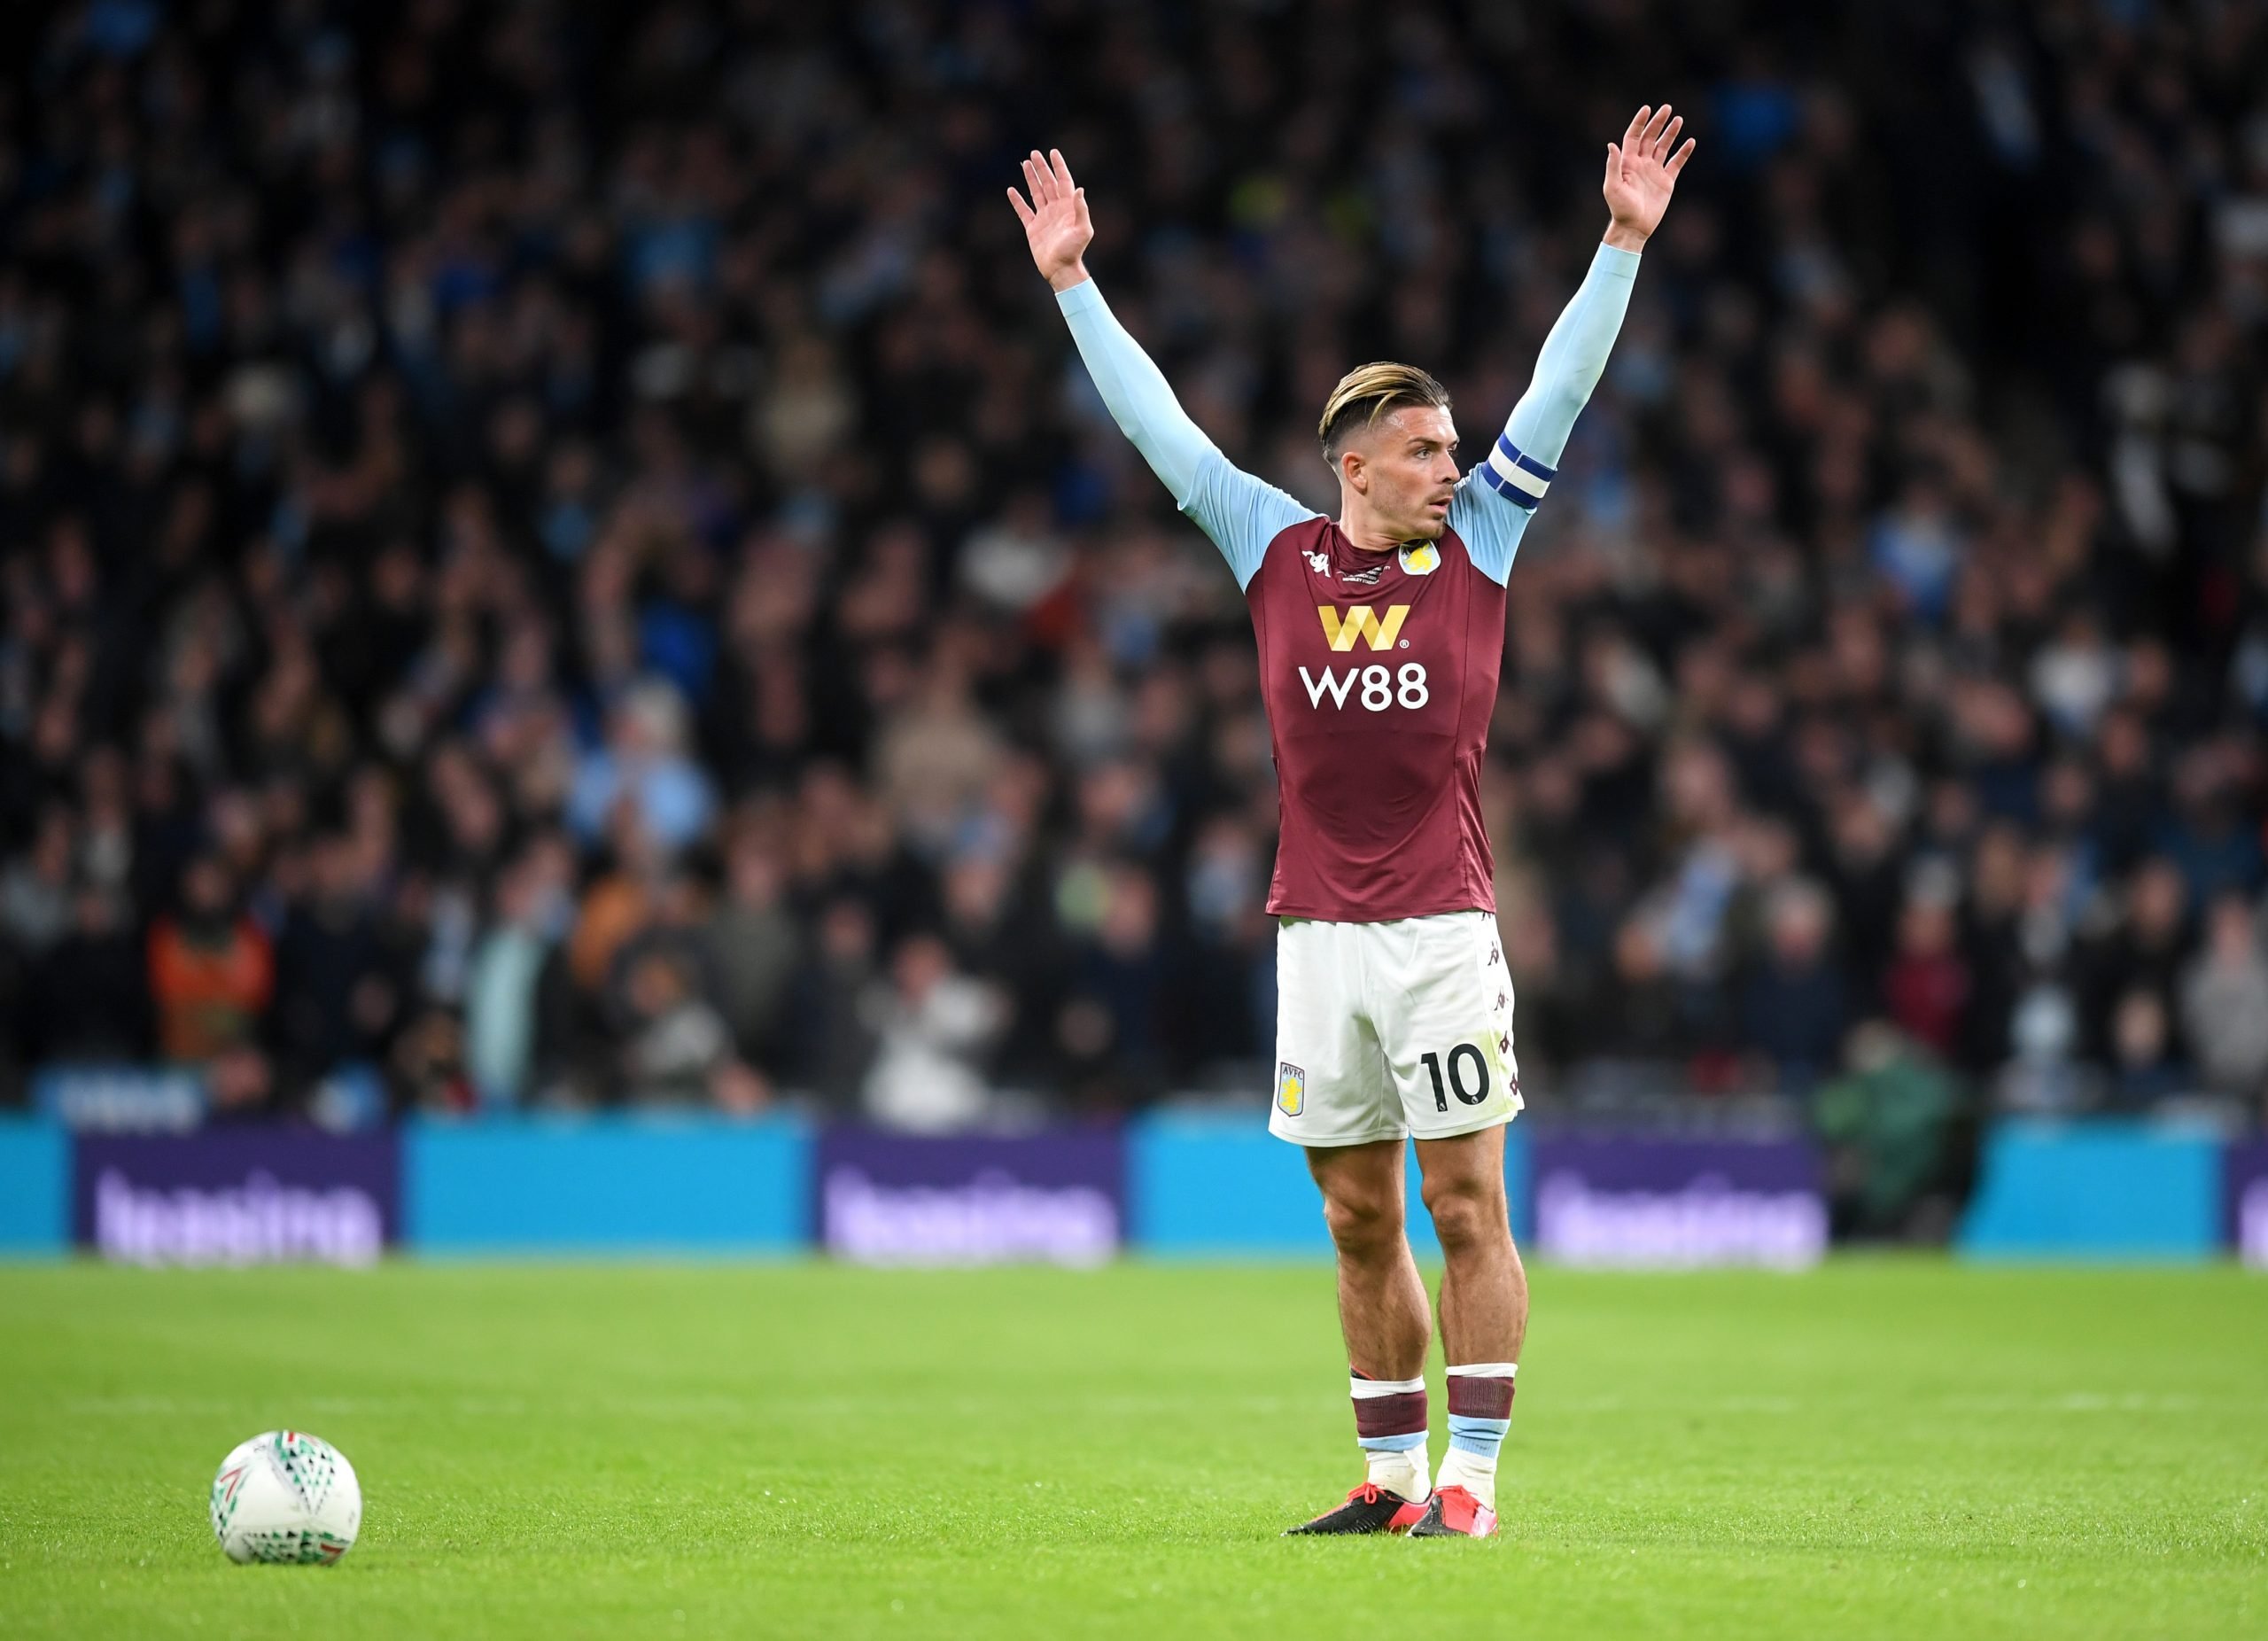 Jack Grealish of Aston Villa prepares to take a free kick during the Carabao Cup Final between Aston Villa and Manchester City at Wembley Stadium on March 01, 2020 in London, England. (Photo by Michael Regan/Getty Images)